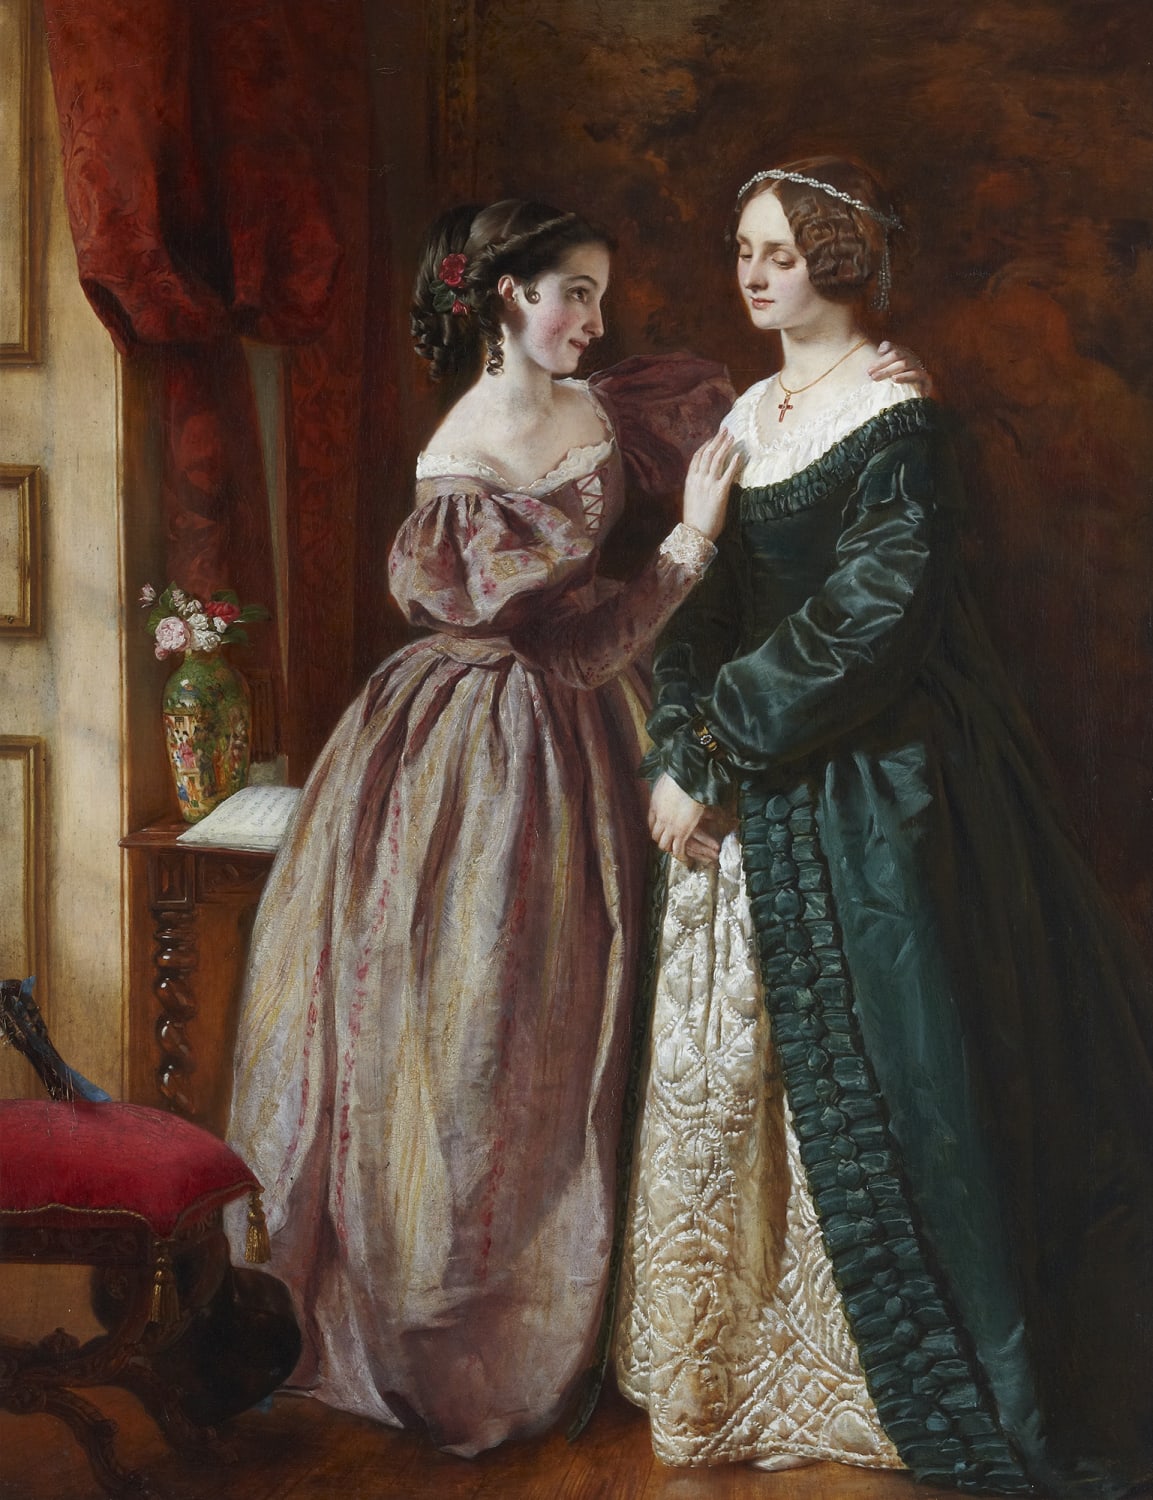 James Archer RSA (1822-1904), Rosalind and Celia  Oil on canvas, around 1854, 93 x 72.1cm  RSA Diploma Collection (Deposited, 1856 or 1858) 1995.034